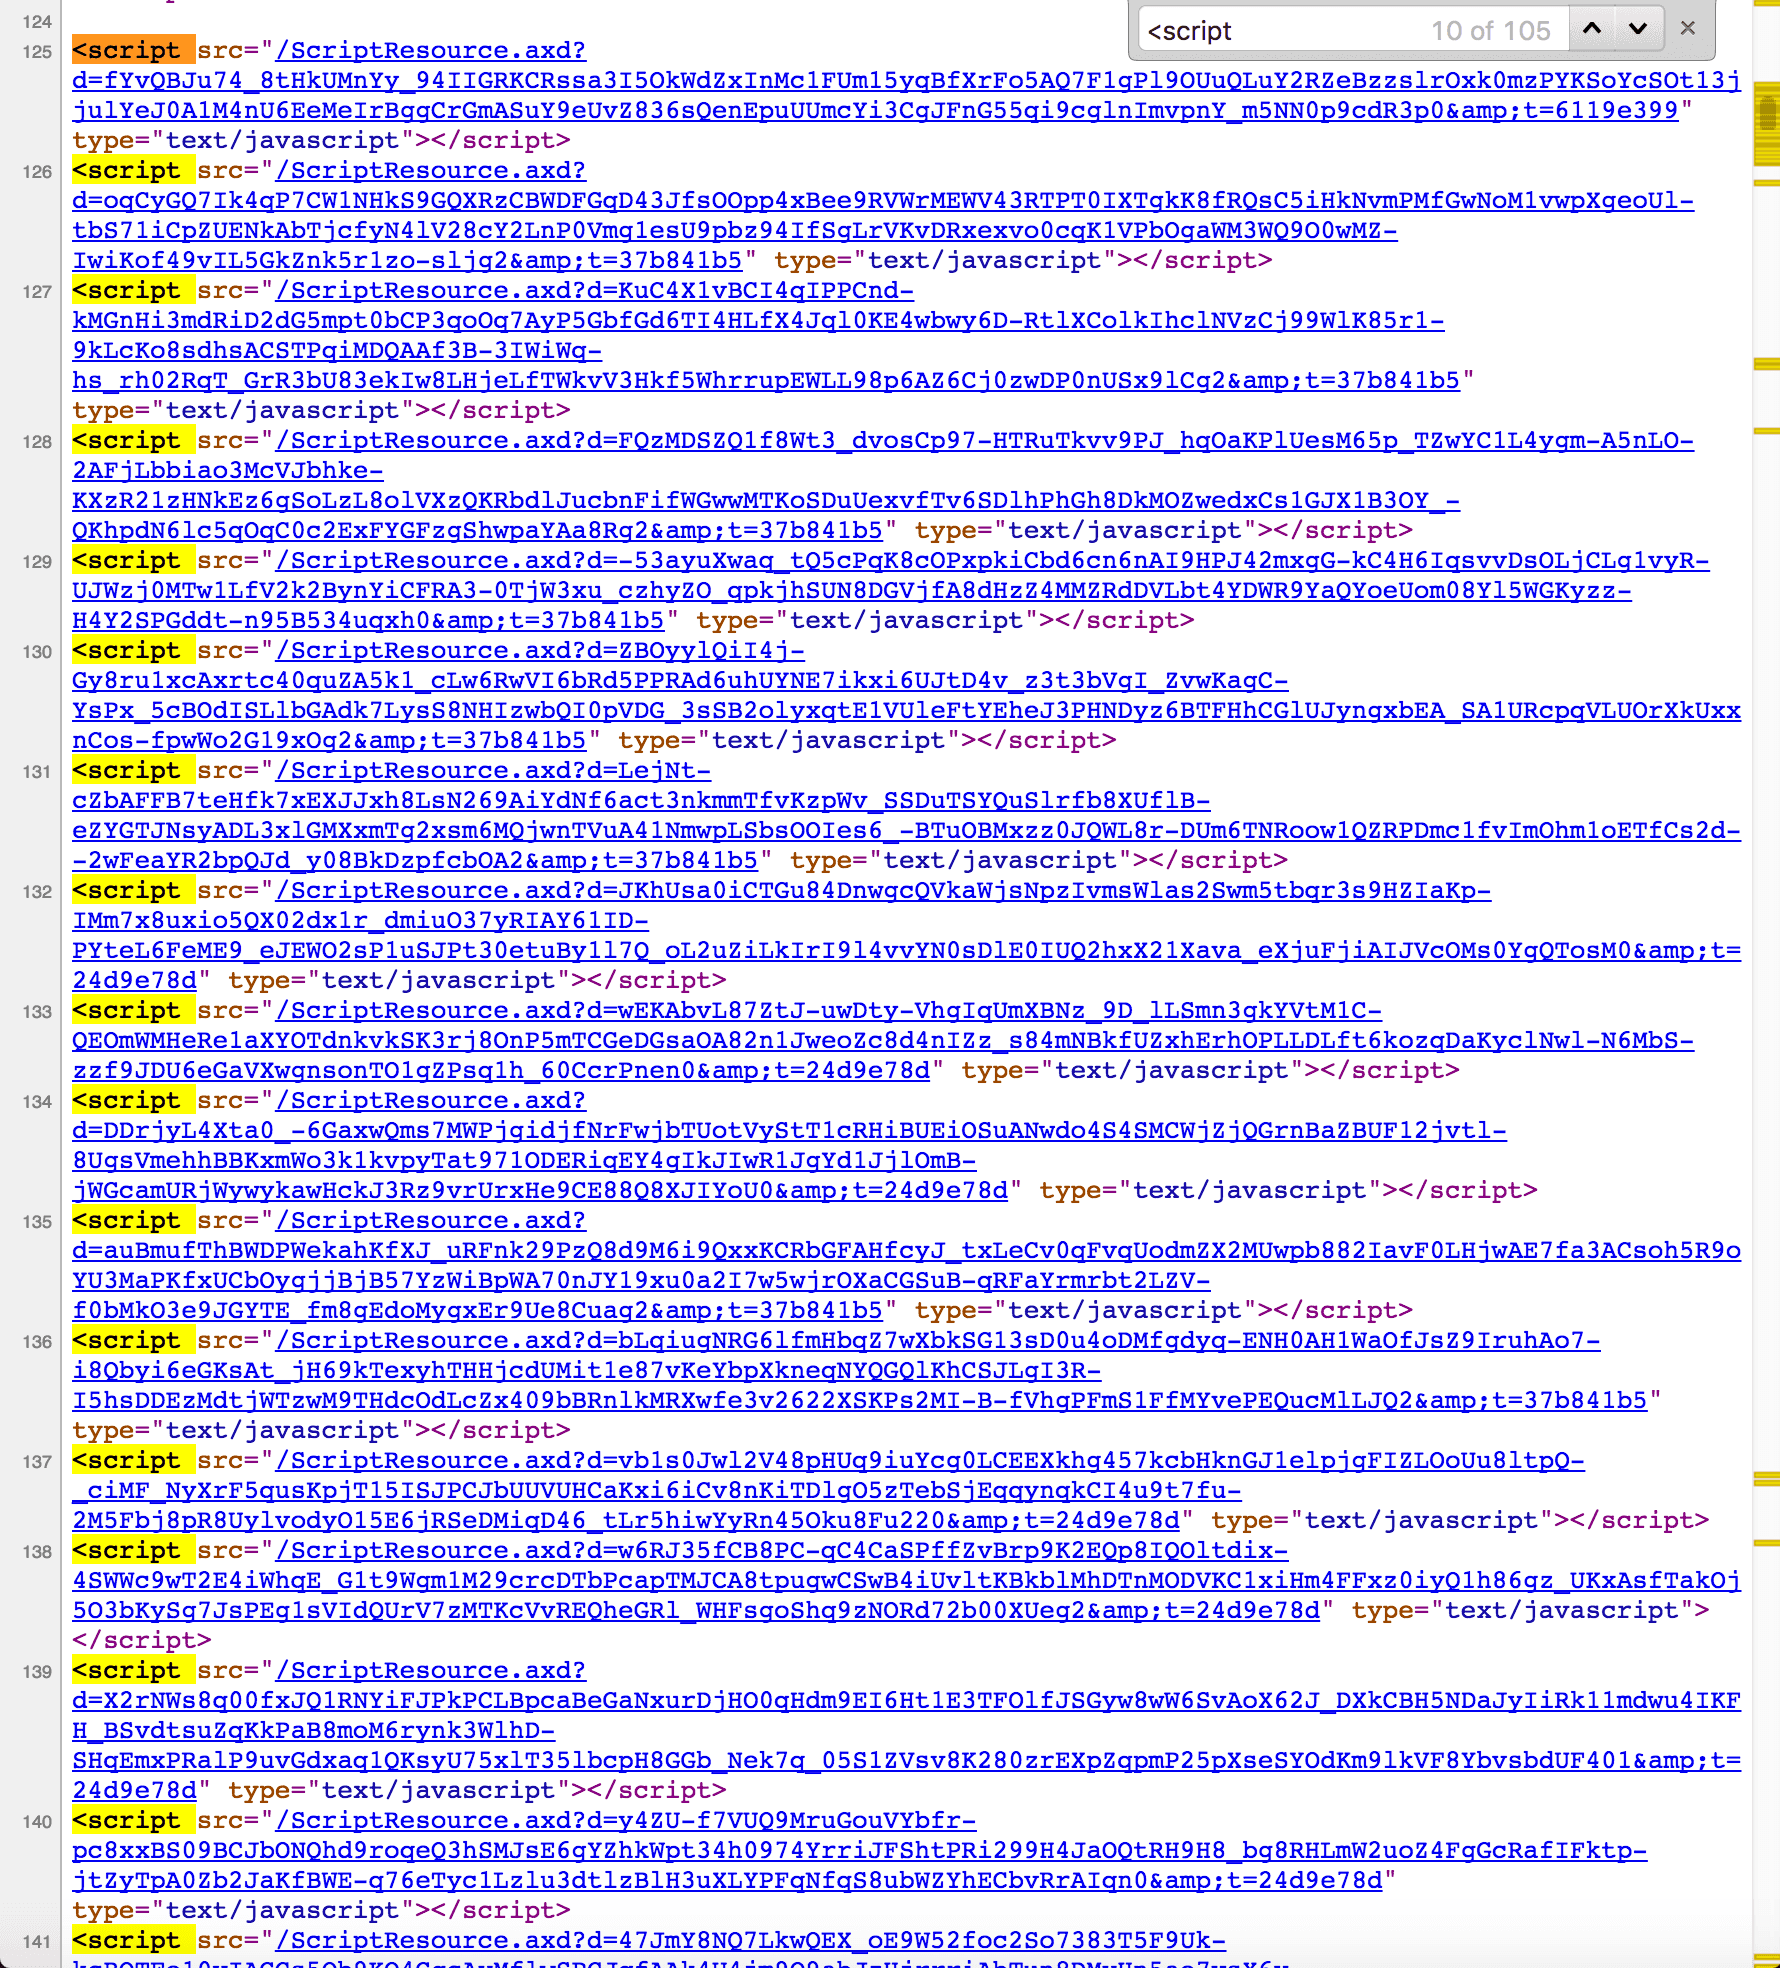 Sitefinity is a mess